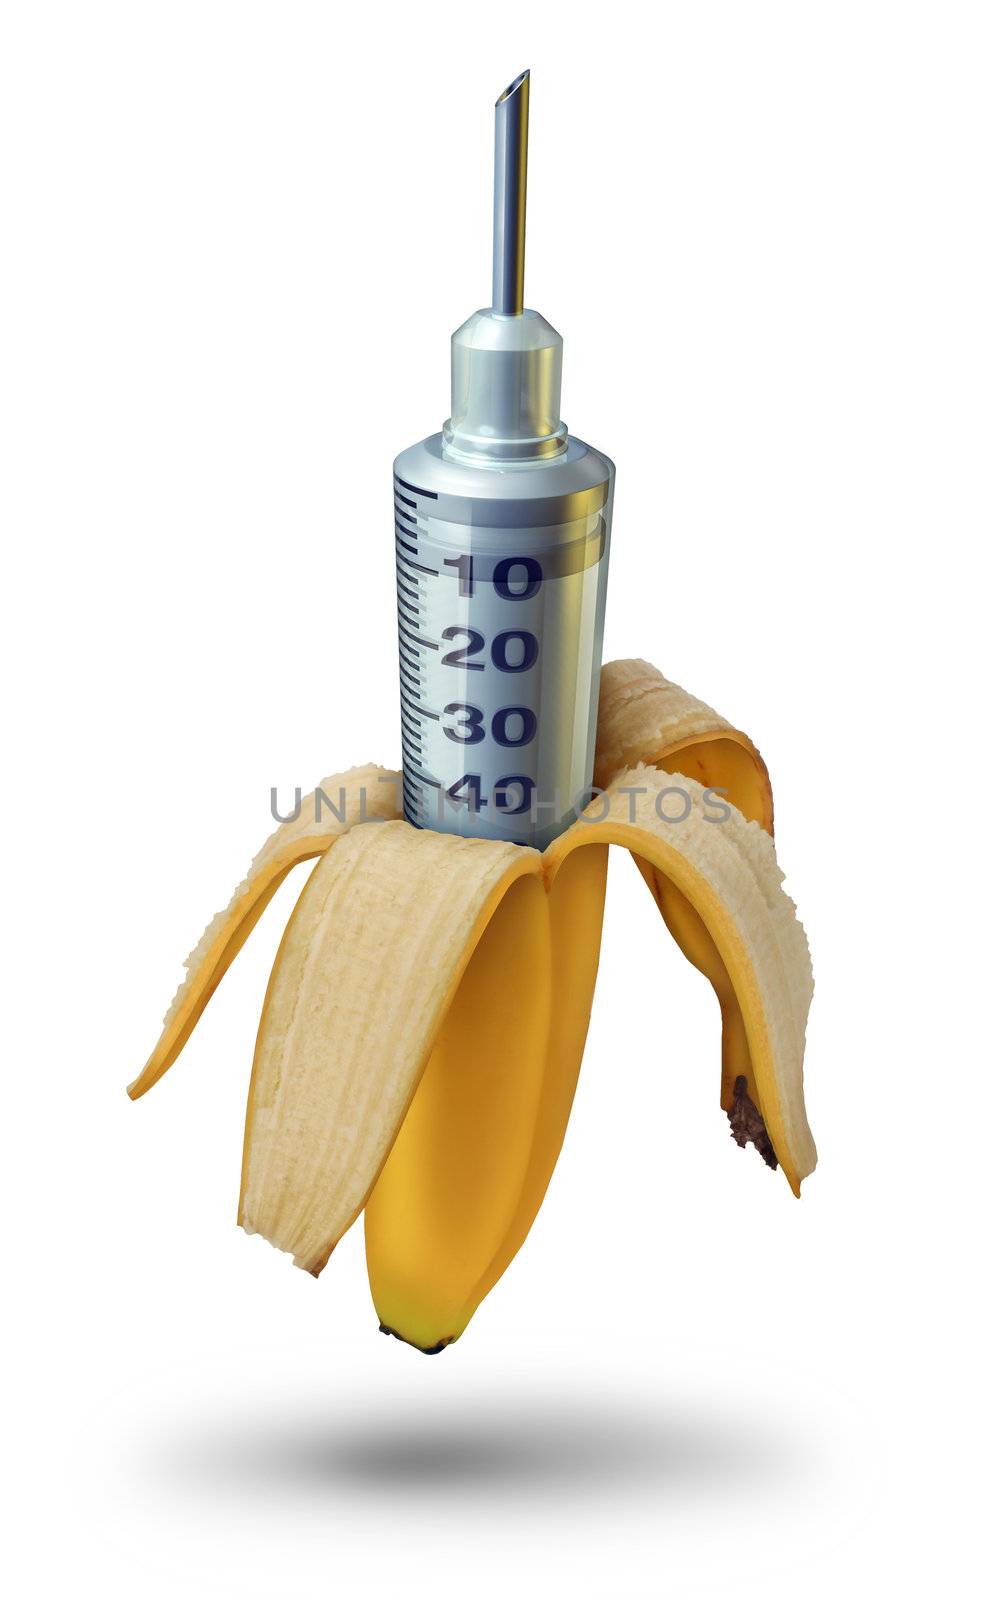 Genetic food modification and gene engeneering of fruits and vegetables as a peeled yellow banana with a medical syringe as a concept for adding chemicals and pesticides for food safety on white.